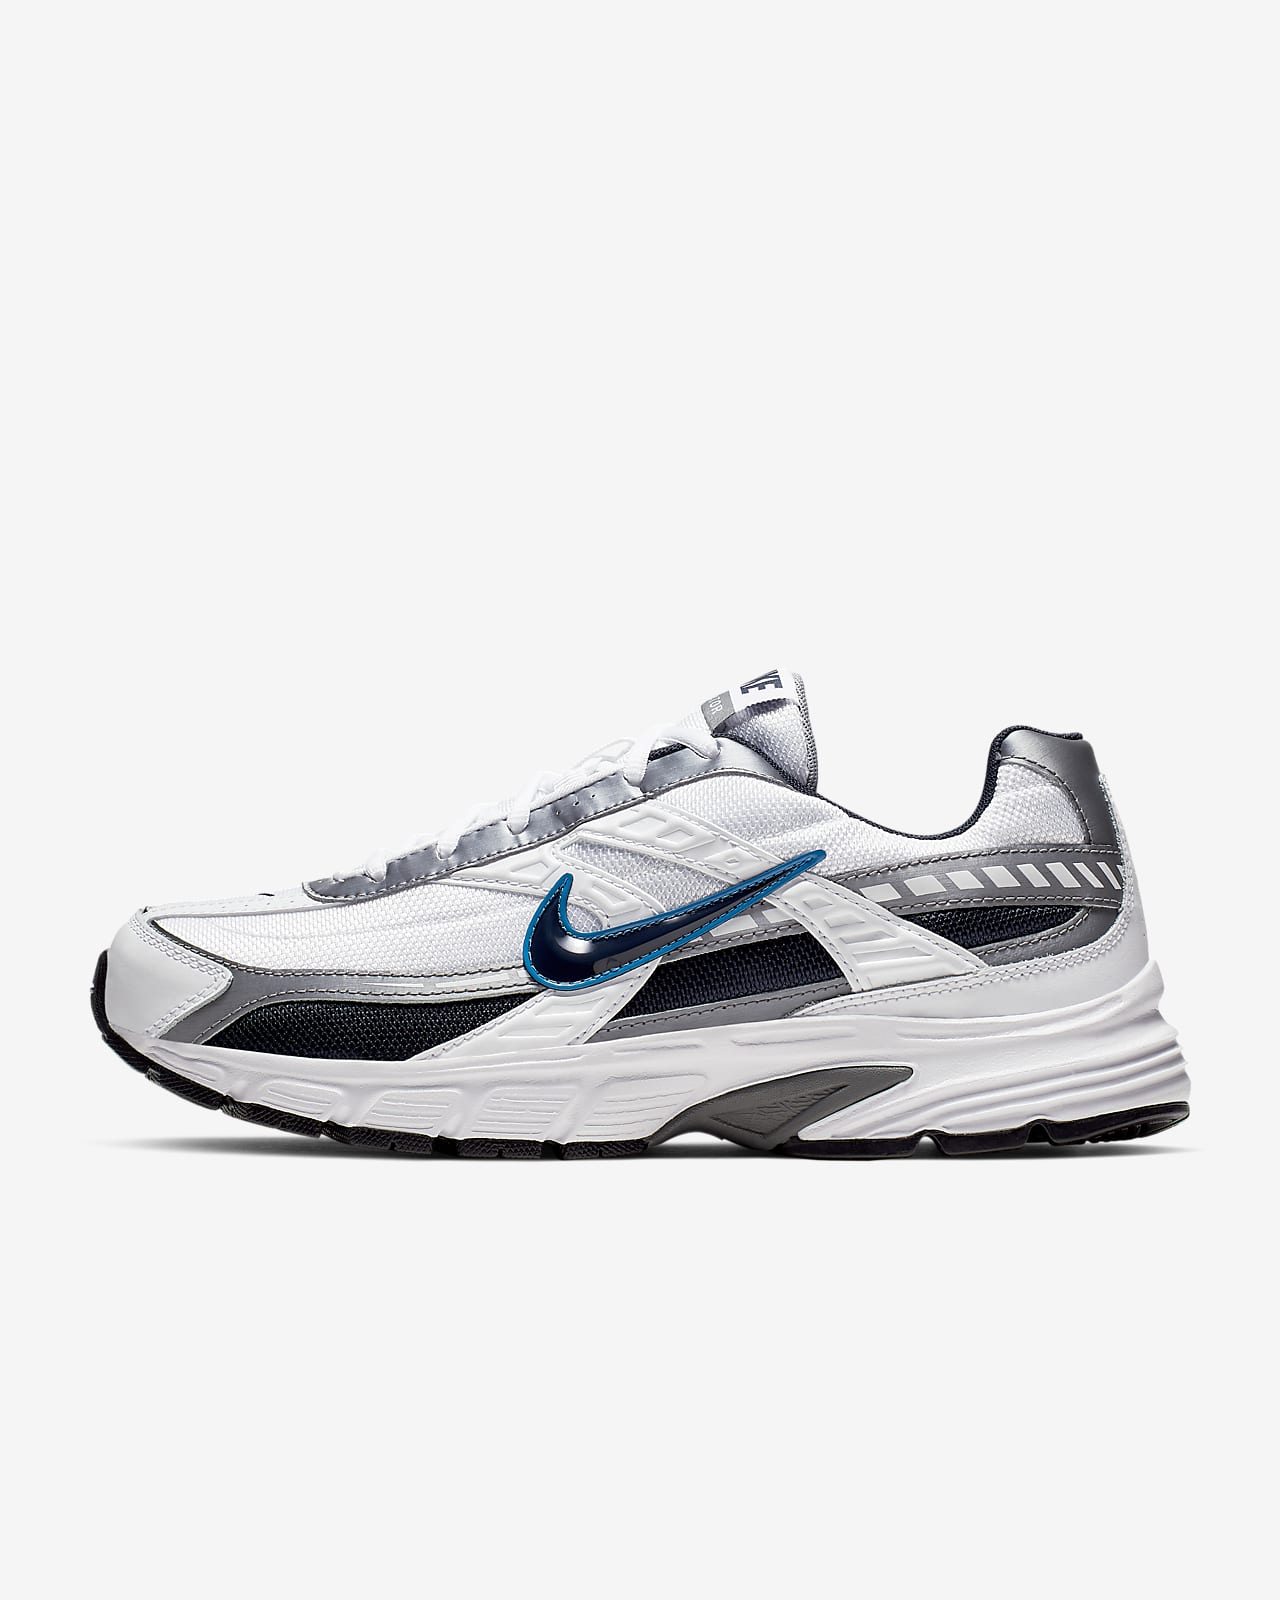 Chaussure de running Nike Initiator pour Homme